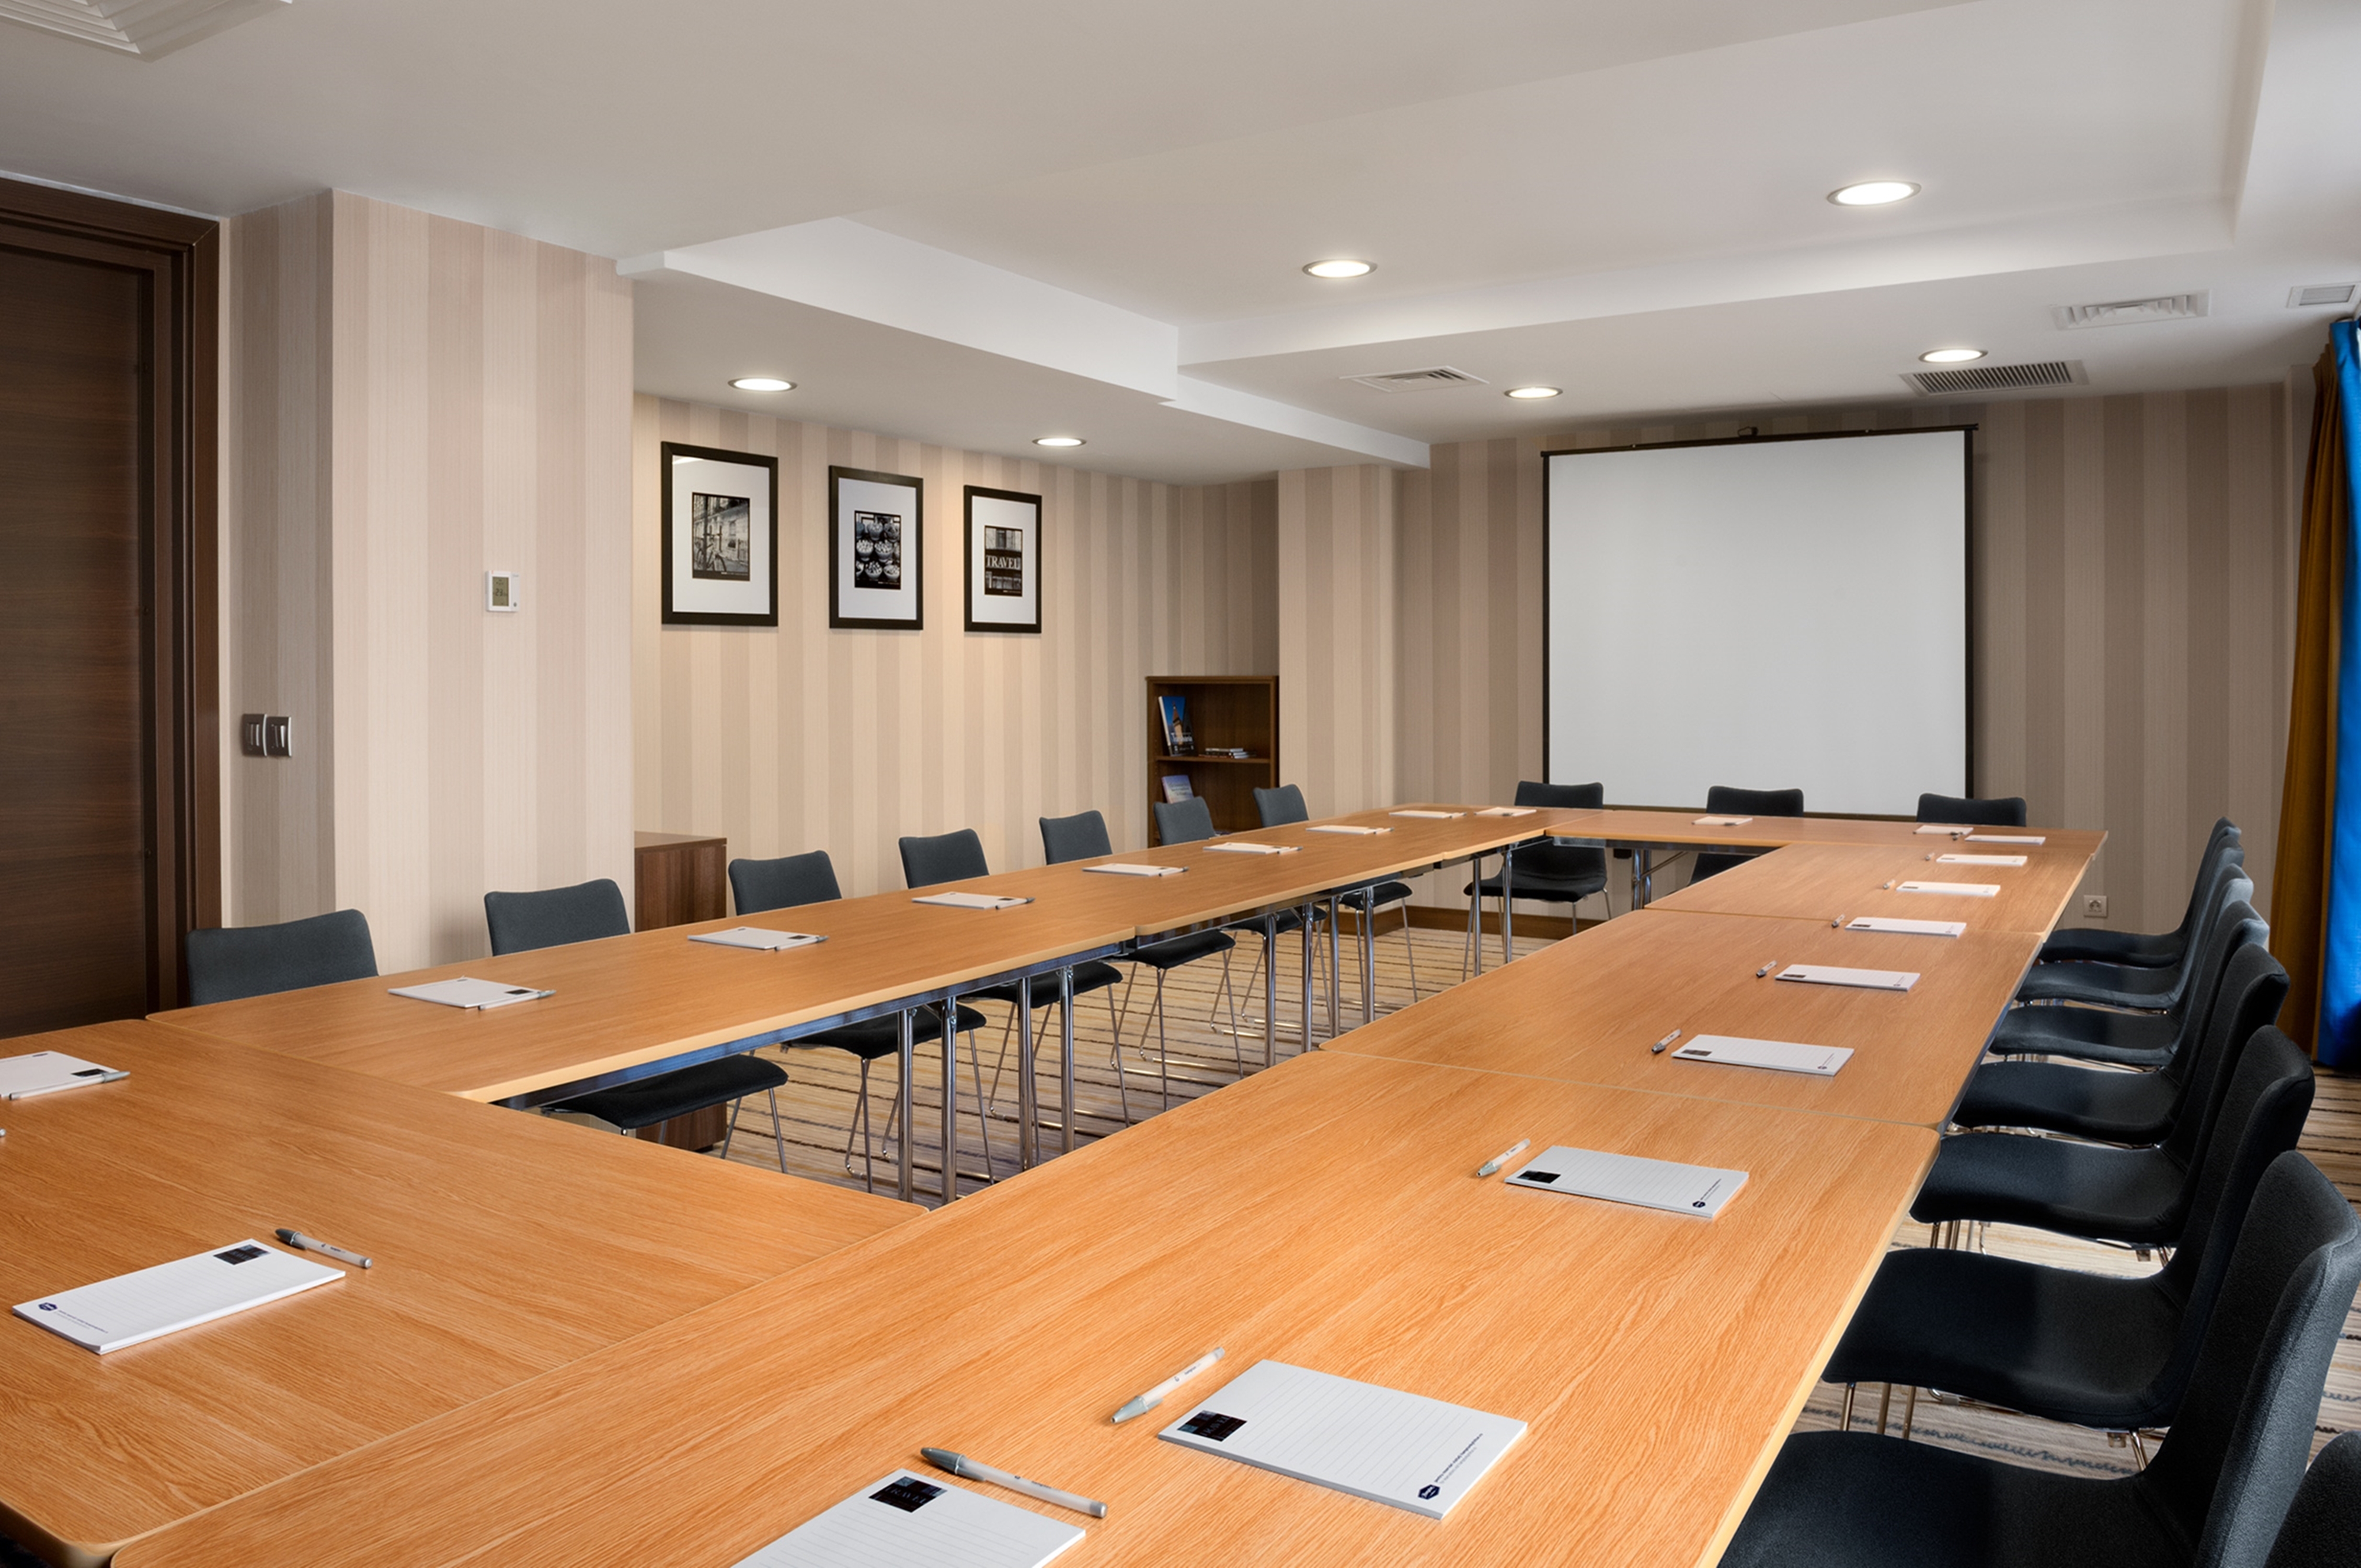 Meeting Room Setup Hollow Square Style and a Projection Screen